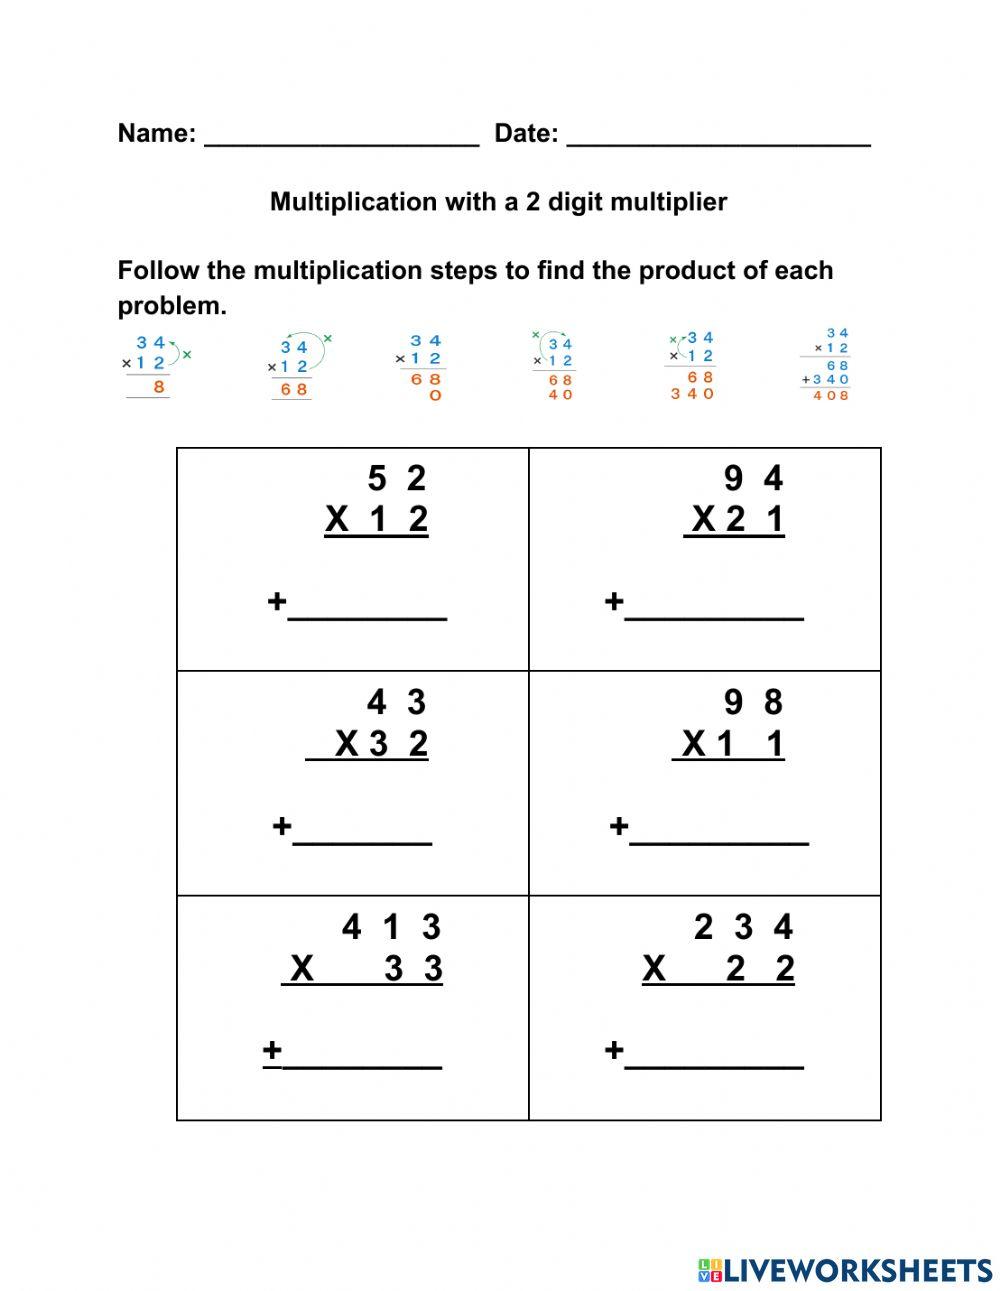 Multiplication by 2 digits